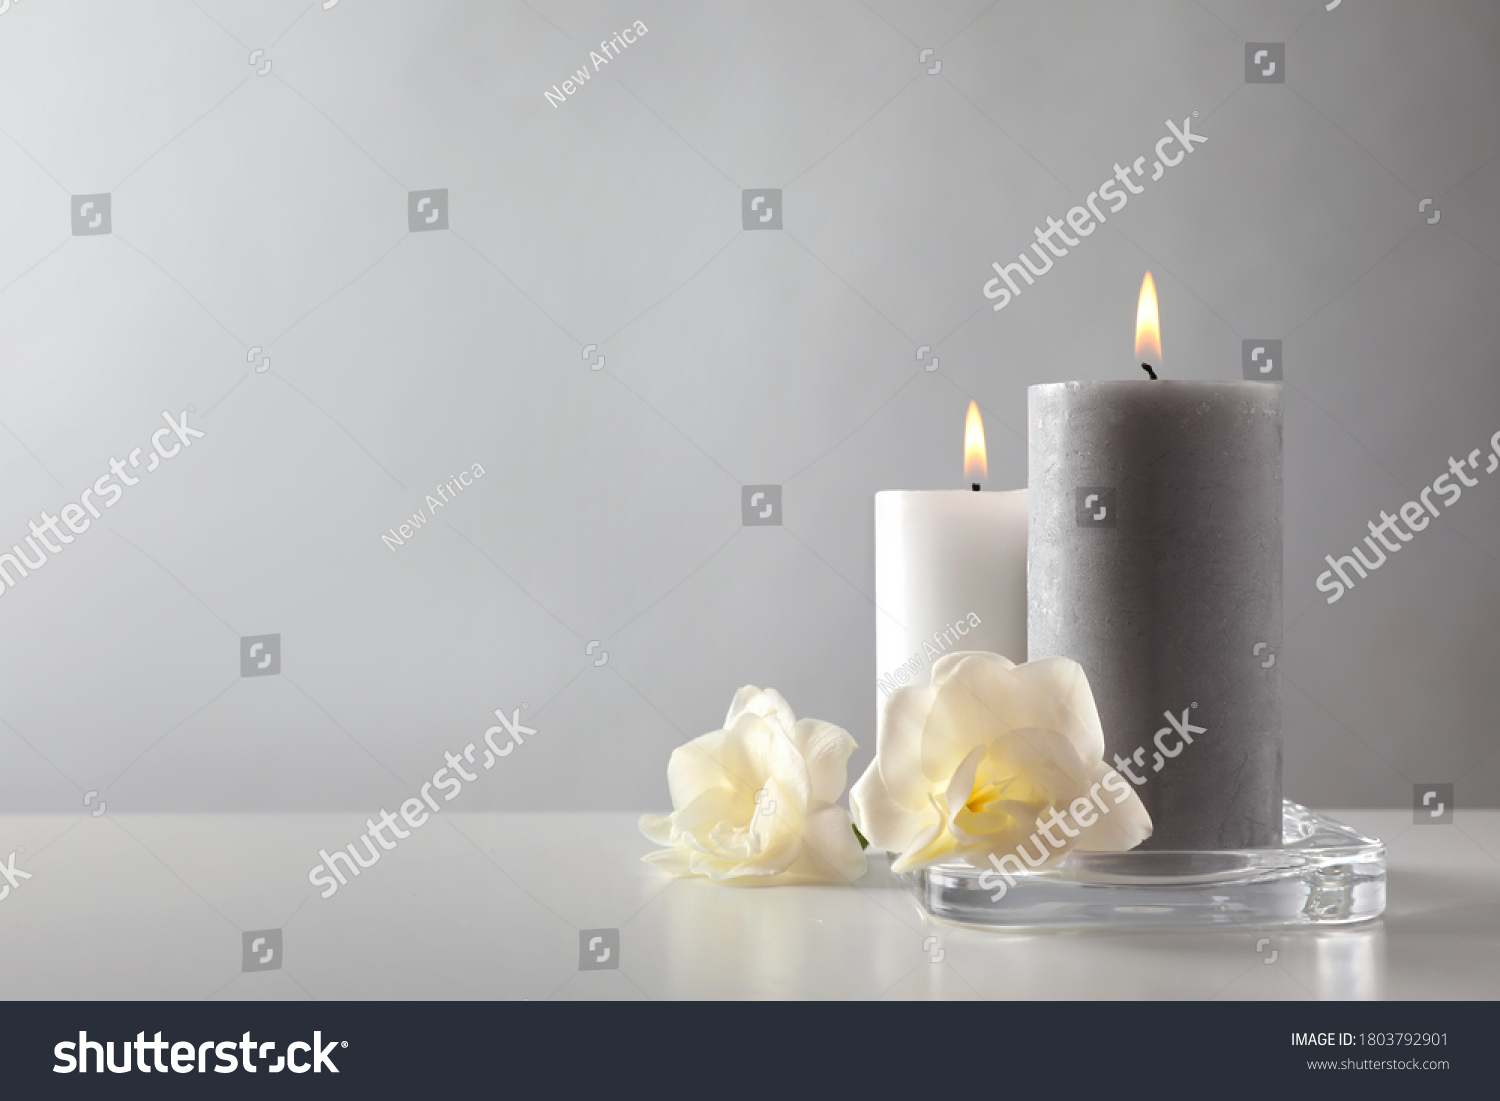 Wax candles and flowers in glass holder on table against light background. Space for text #1803792901